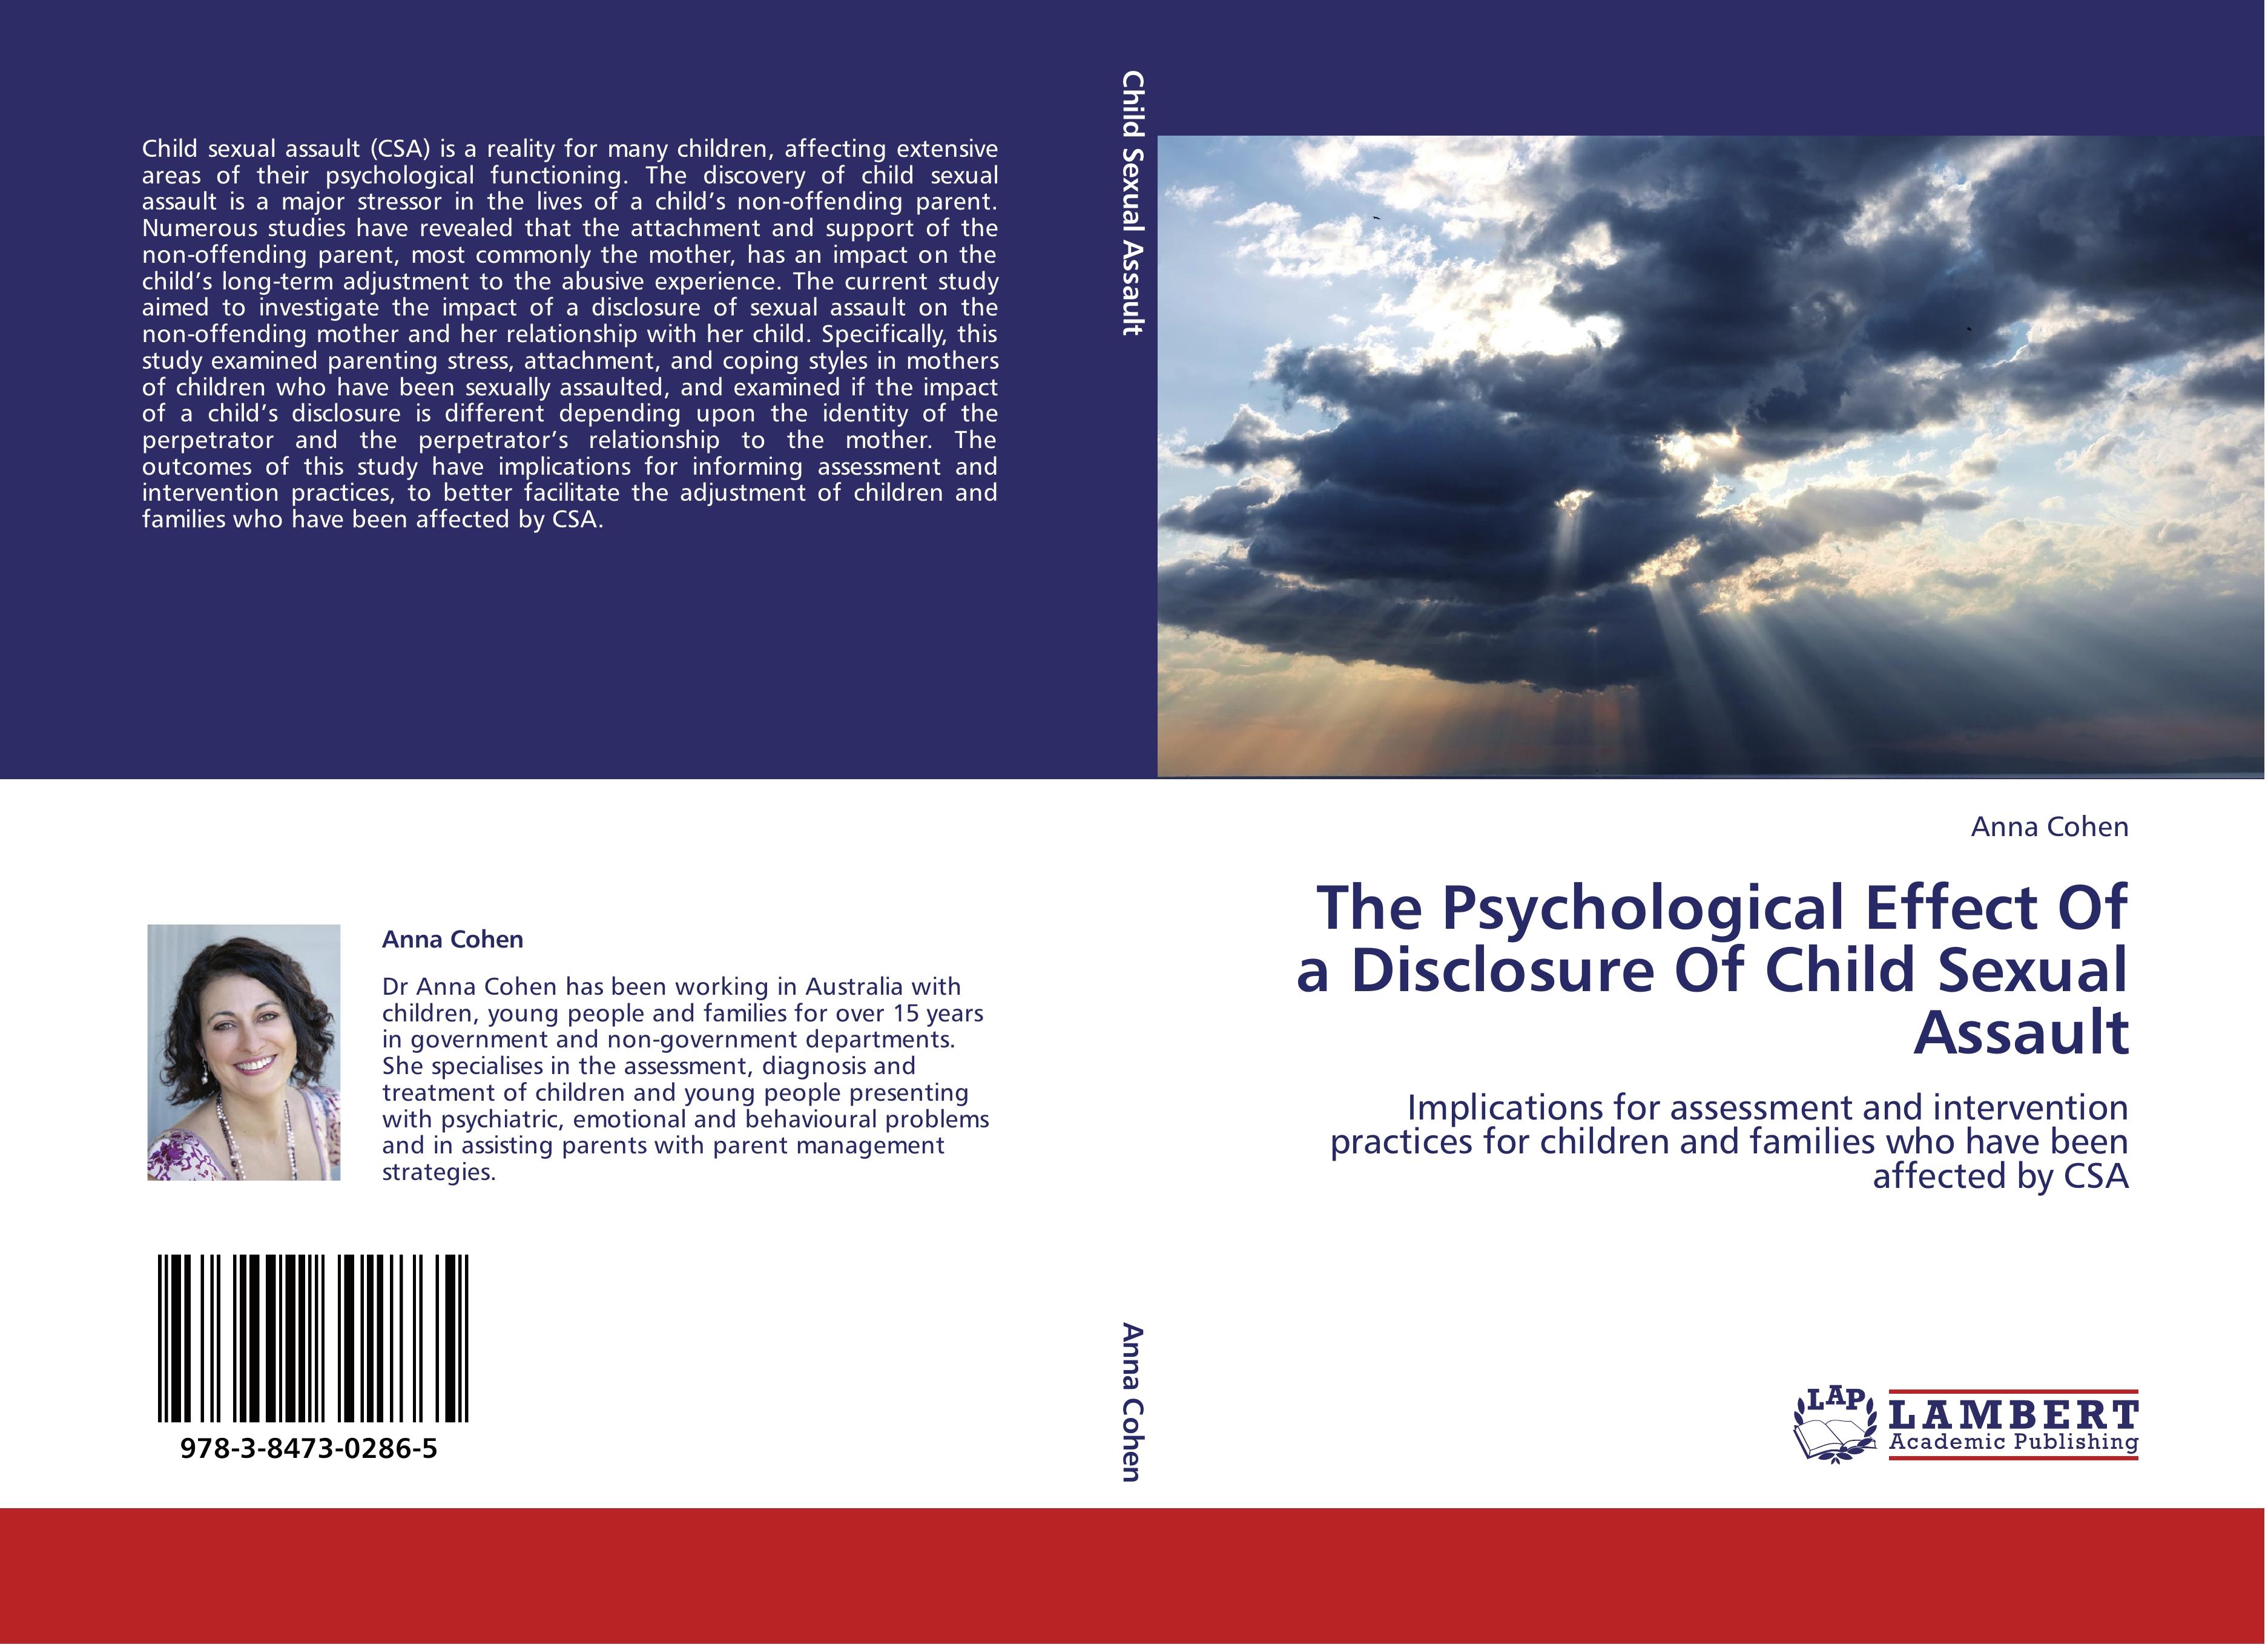 The Psychological Effect Of a Disclosure Of Child Sexual Assault - Anna Cohen